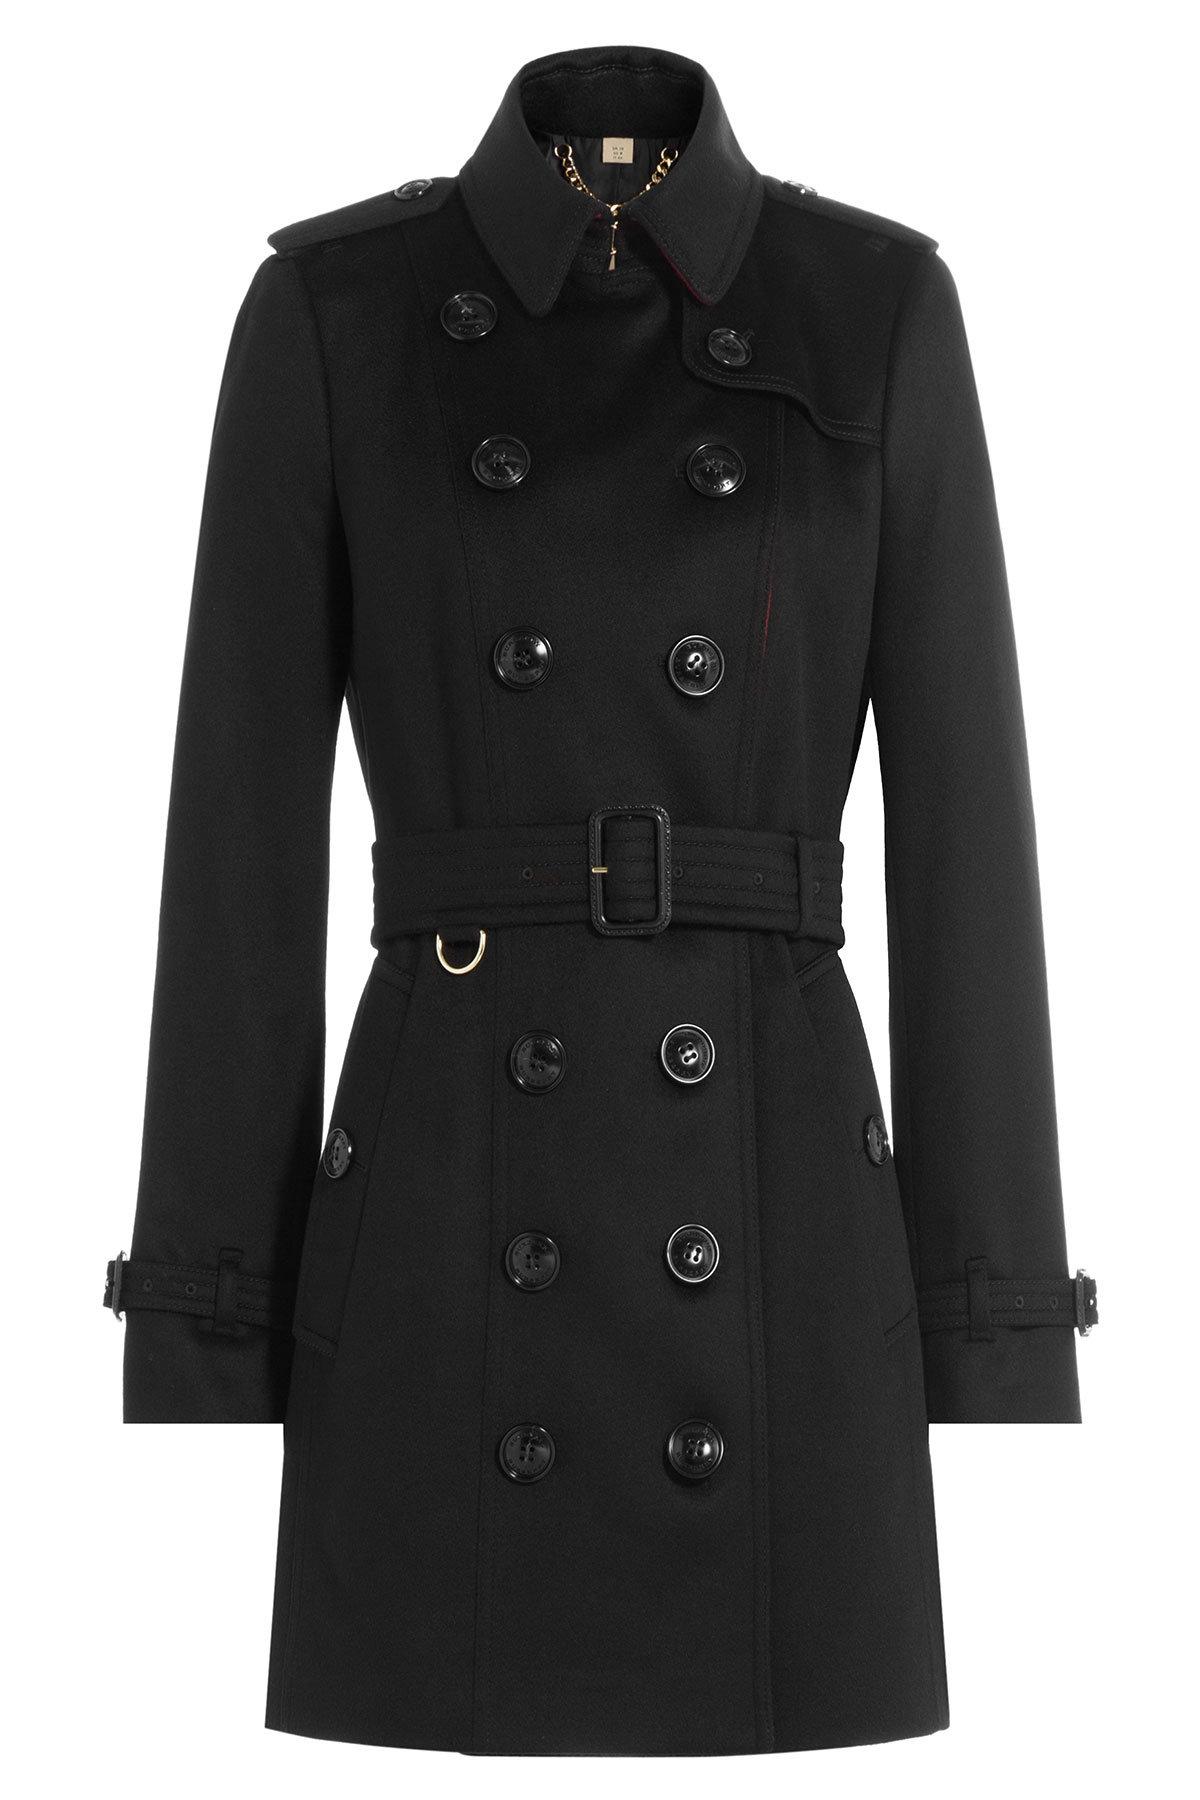 burberry black trench womens